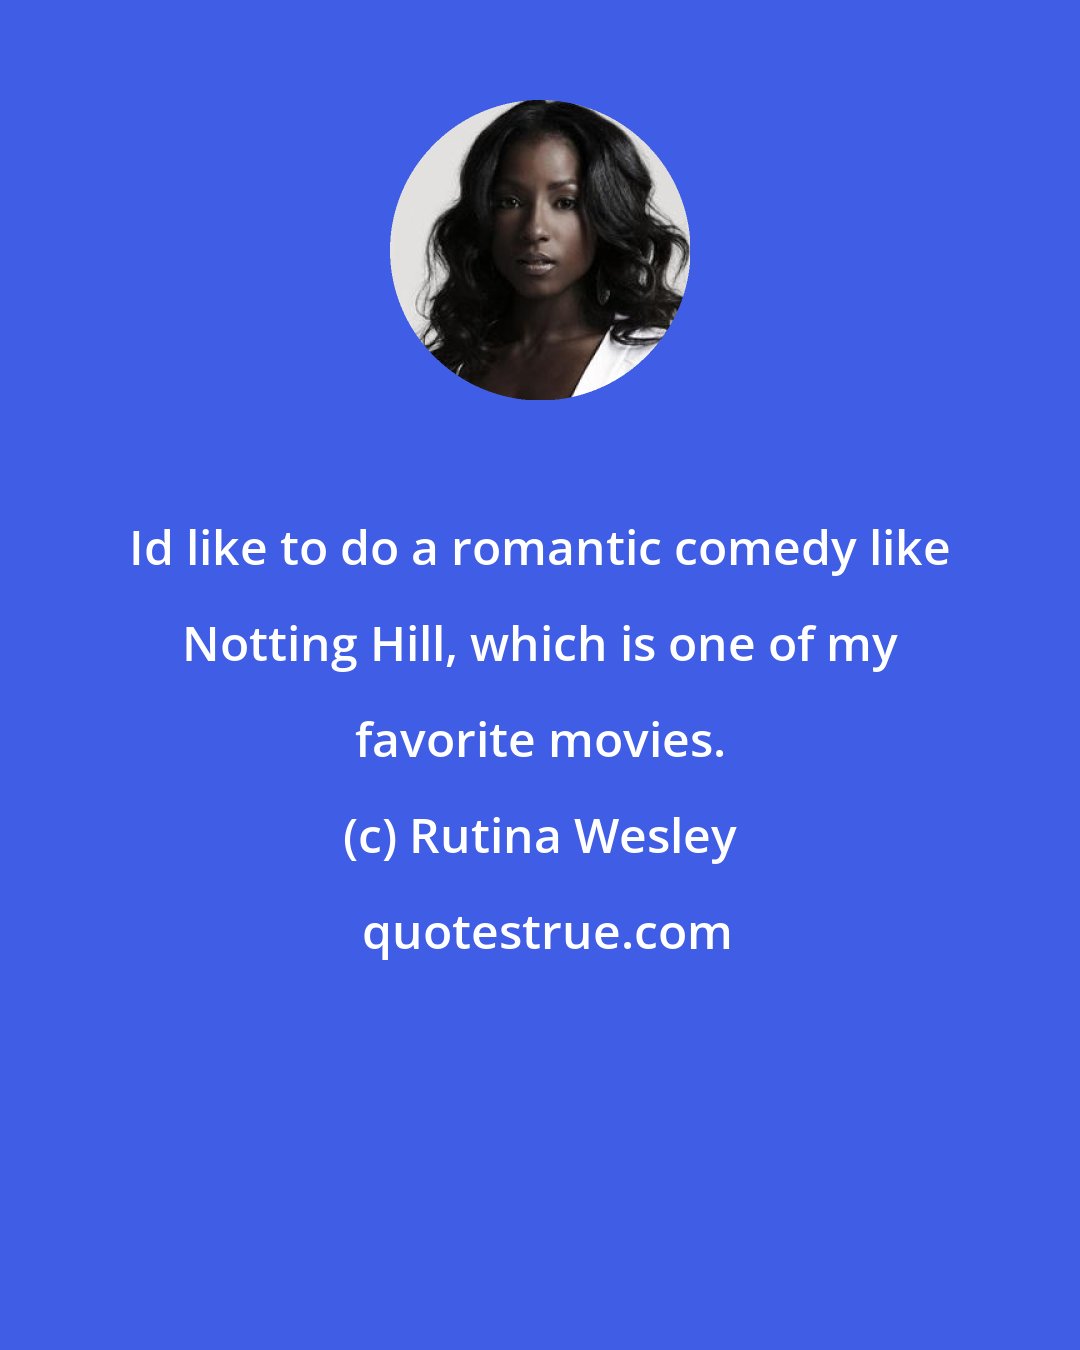 Rutina Wesley: Id like to do a romantic comedy like Notting Hill, which is one of my favorite movies.